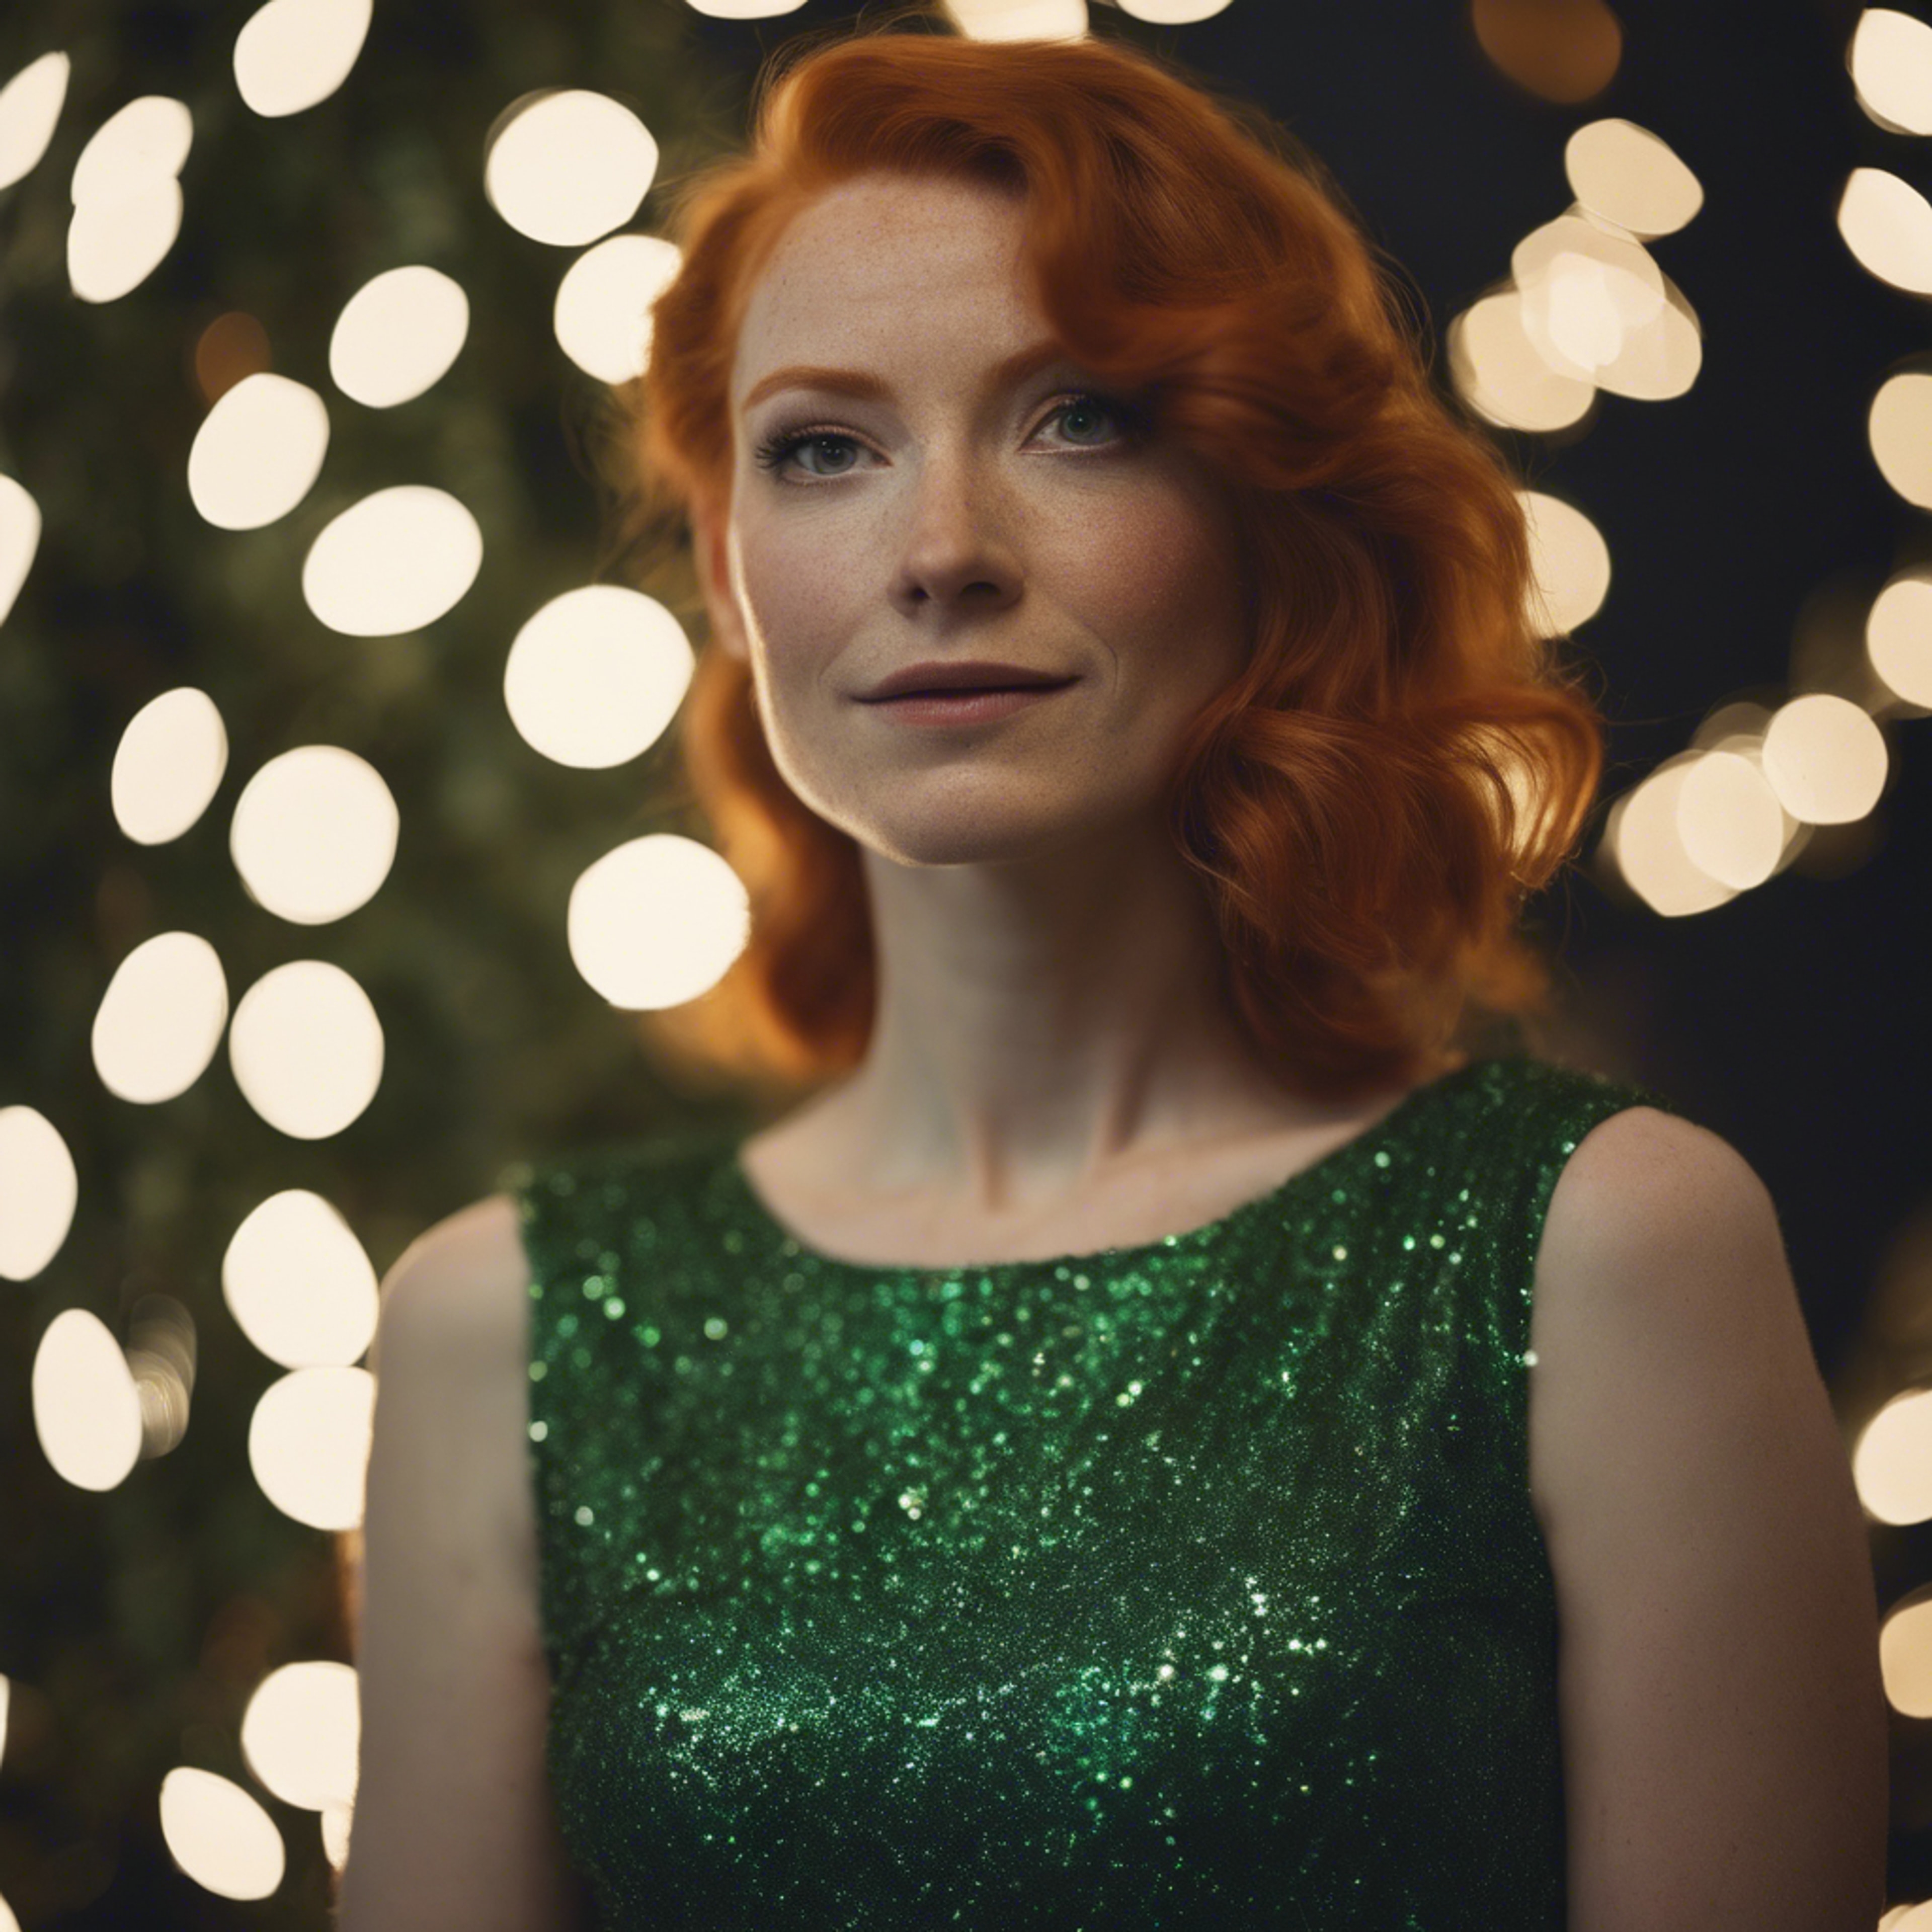 A redheaded woman wearing a sparkly green dress at a Christmas party Ფონი[a7aea6b7222f4d2facc9]